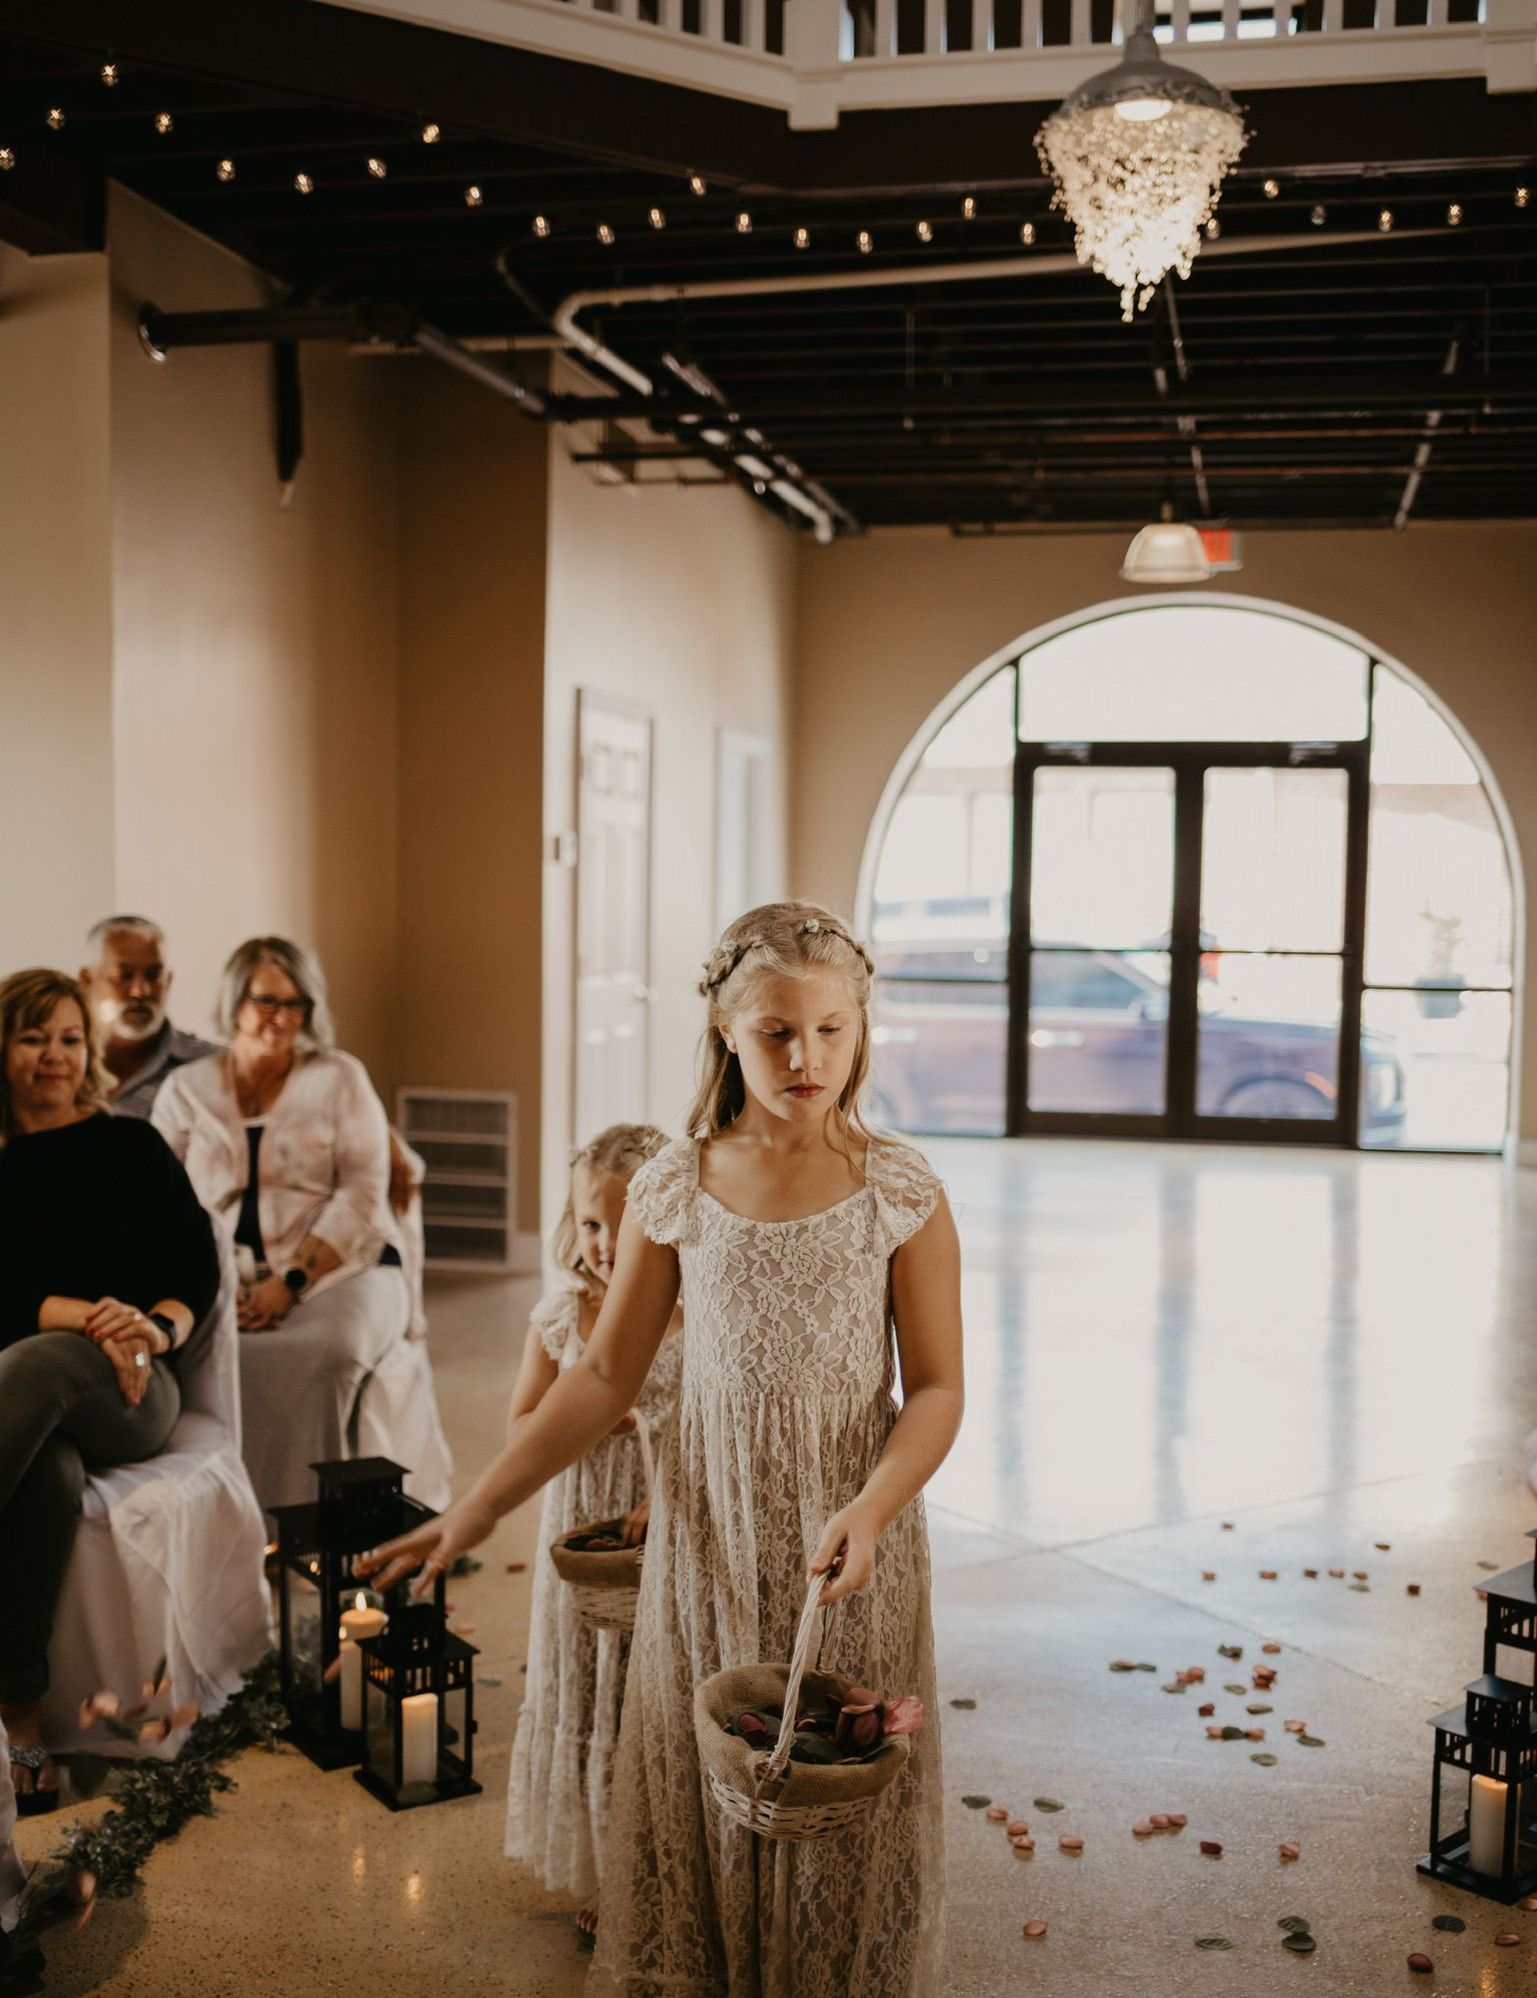 a flower girl is walking down the aisle at a wedding.